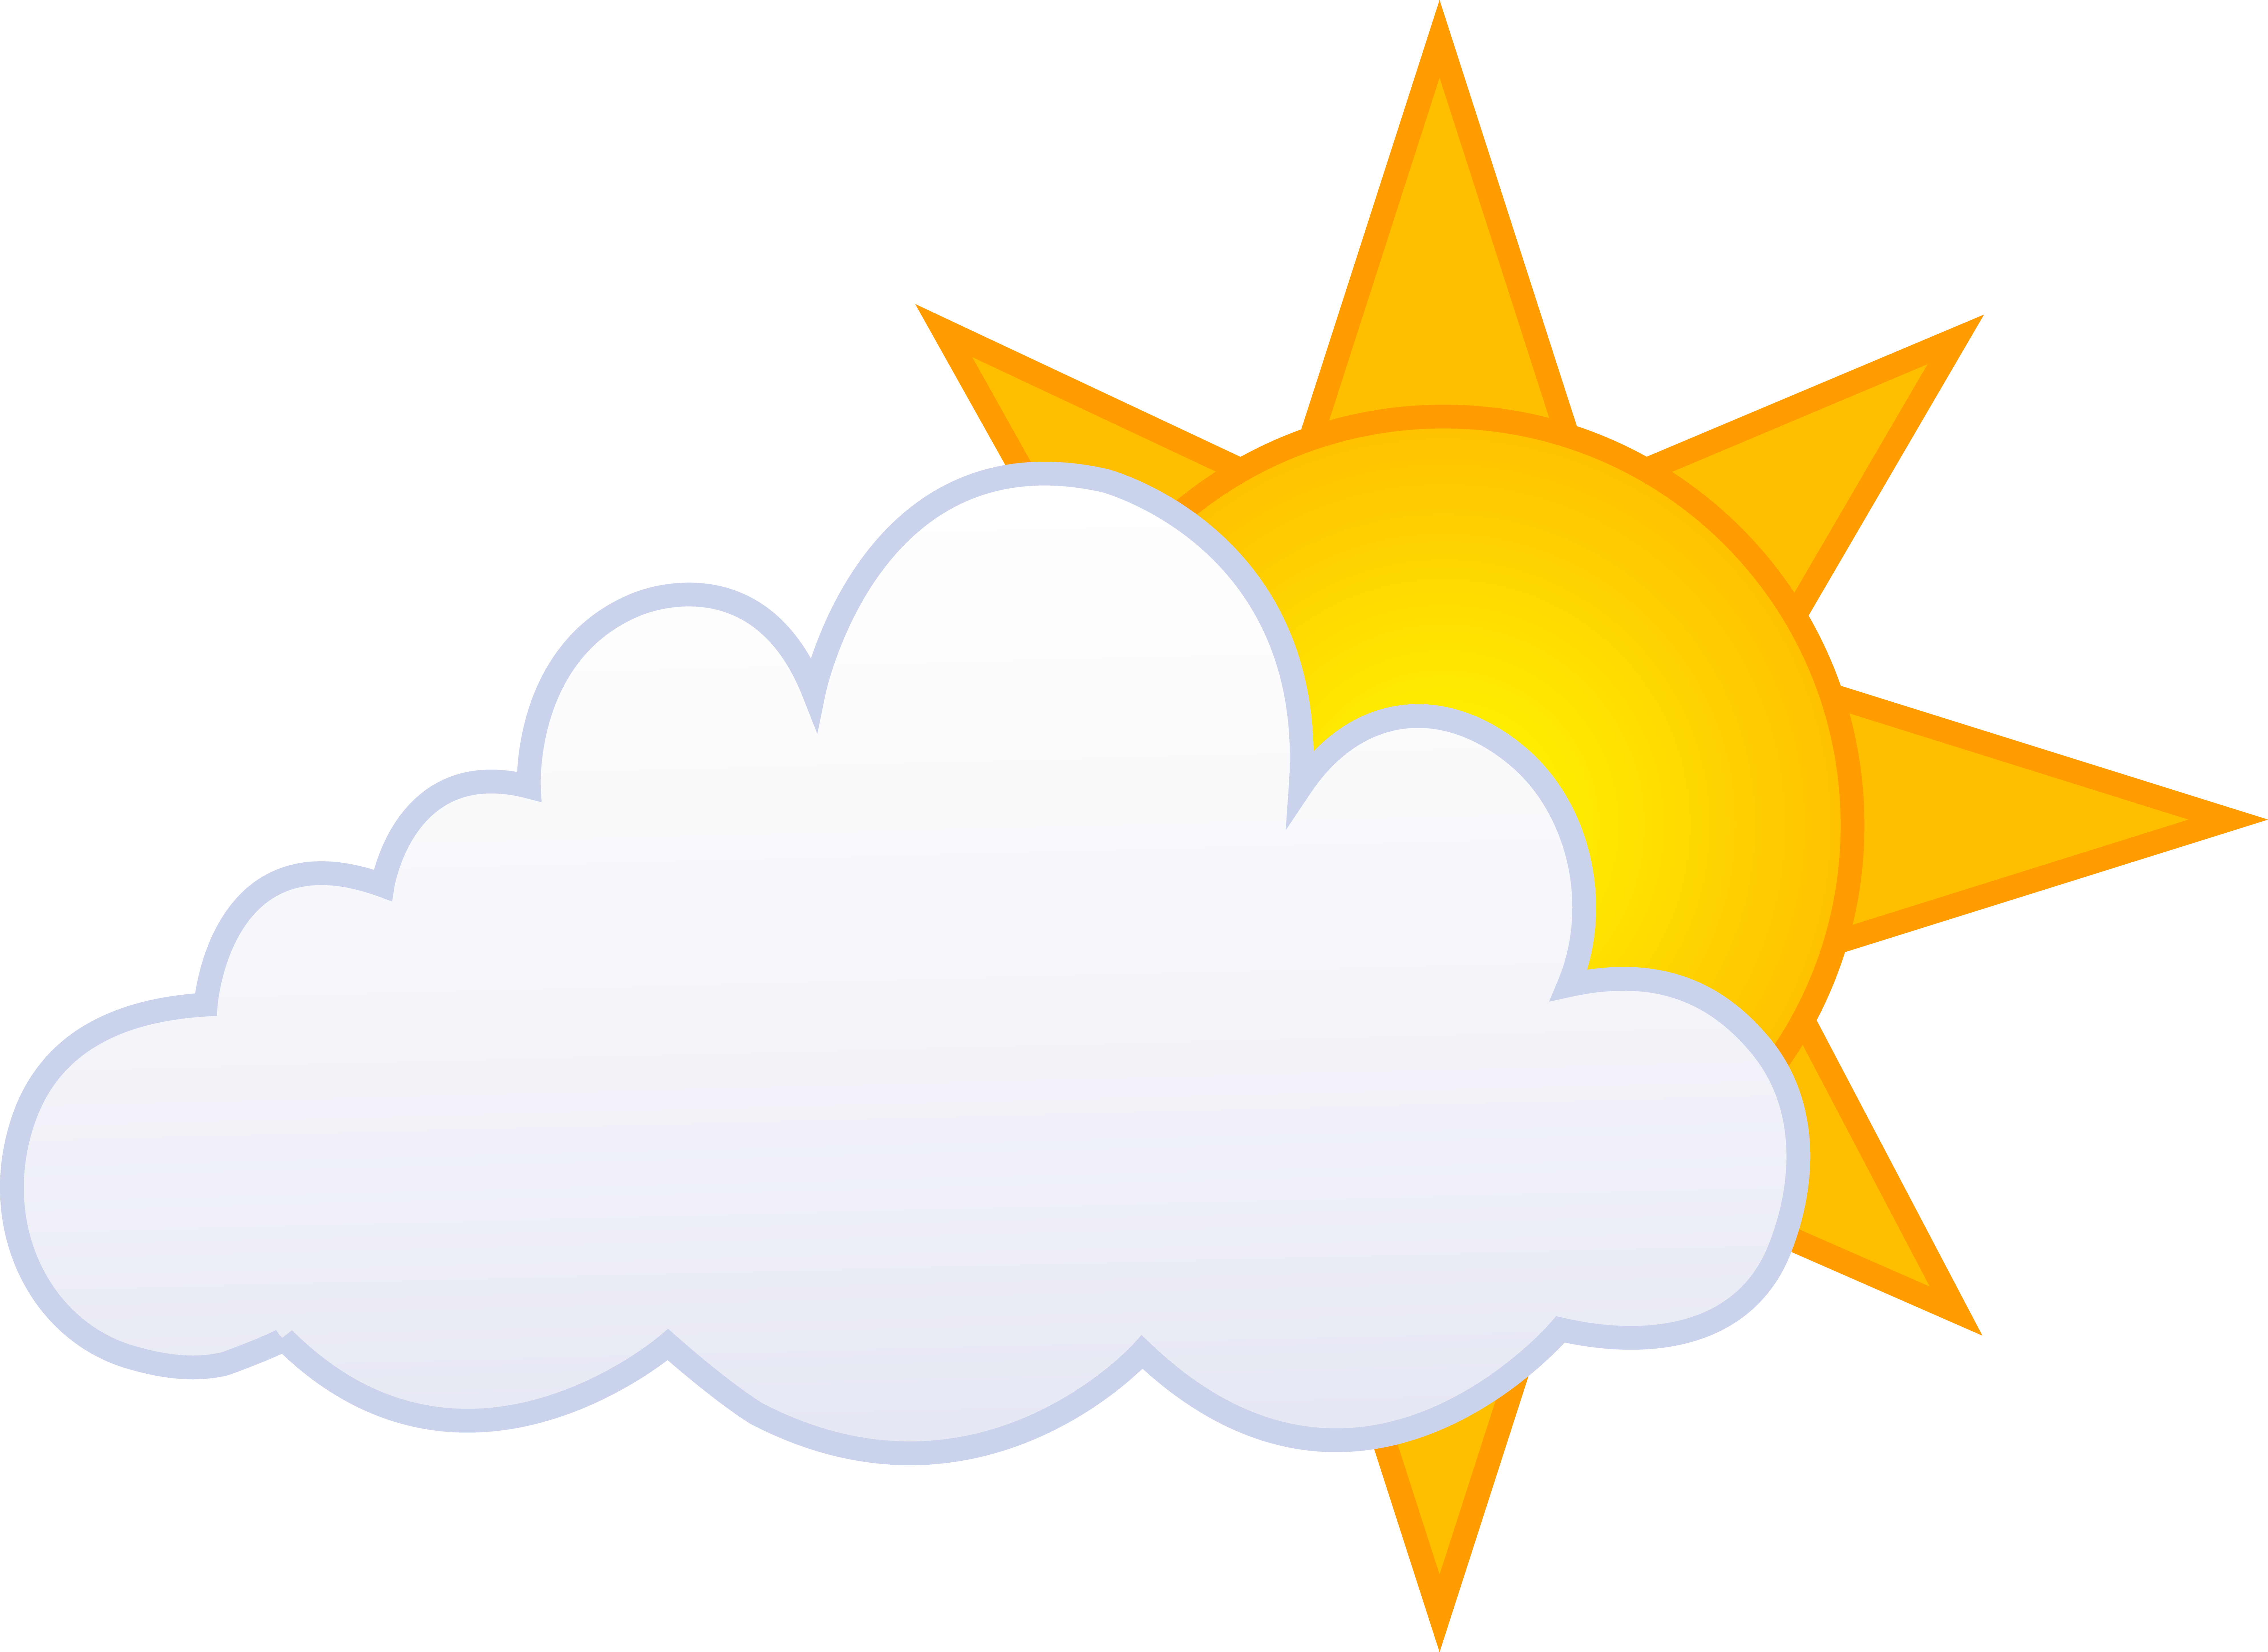 Free Partly Cloudy Clipart, Download Free Clip Art, Free.